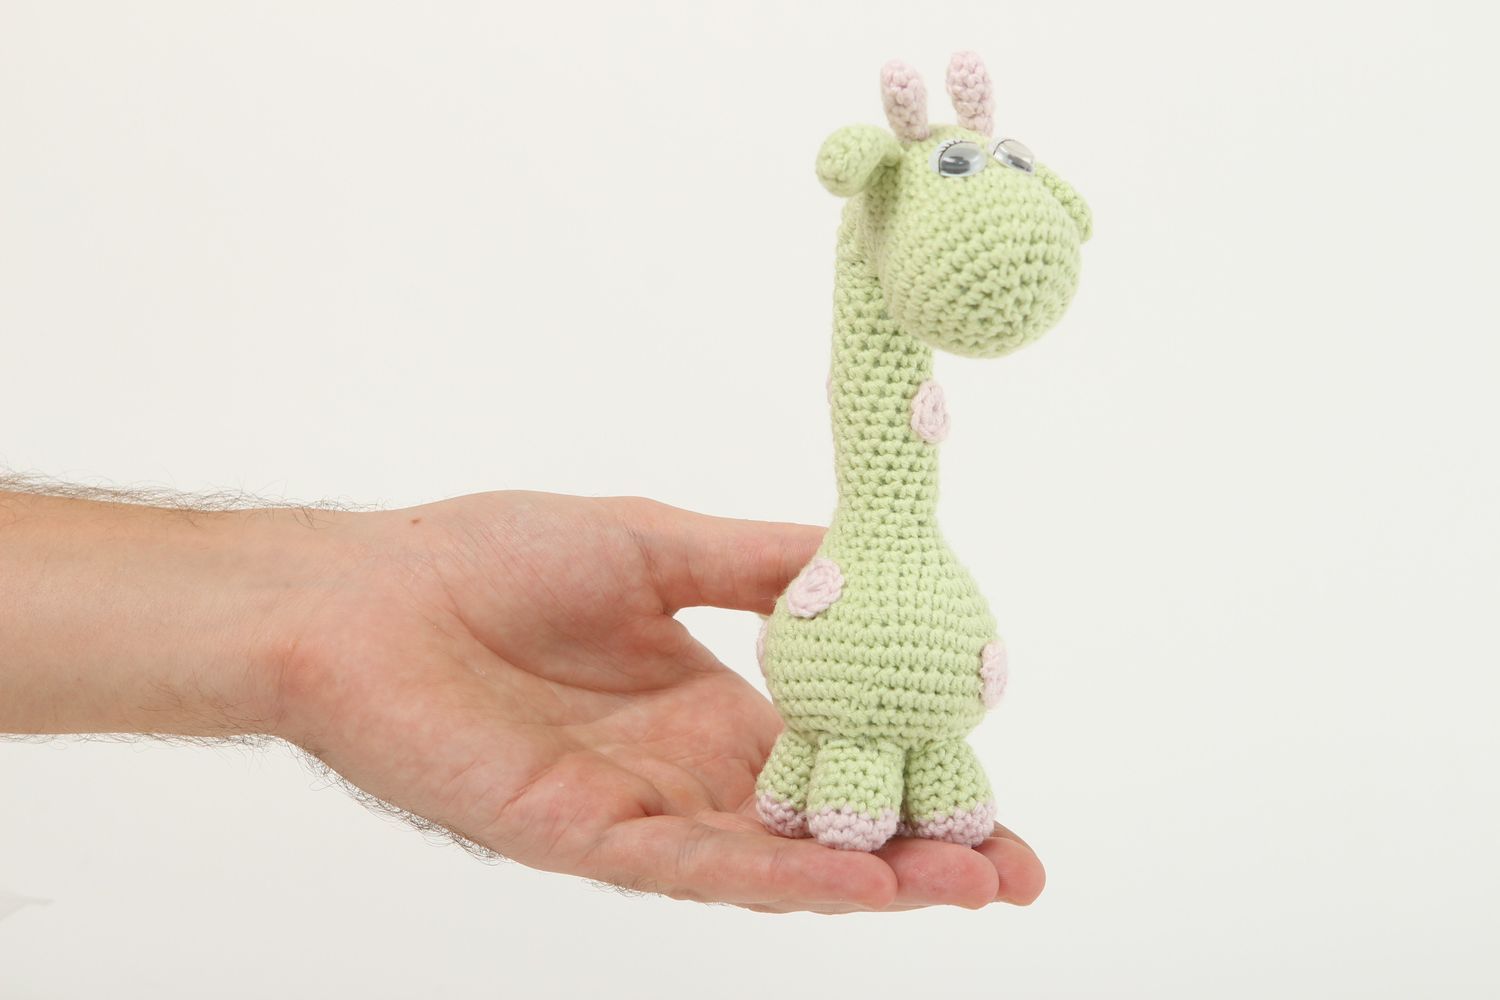 Handmade soft toy giraffe baby toy decorative crocheted toy cute toy for kids photo 5